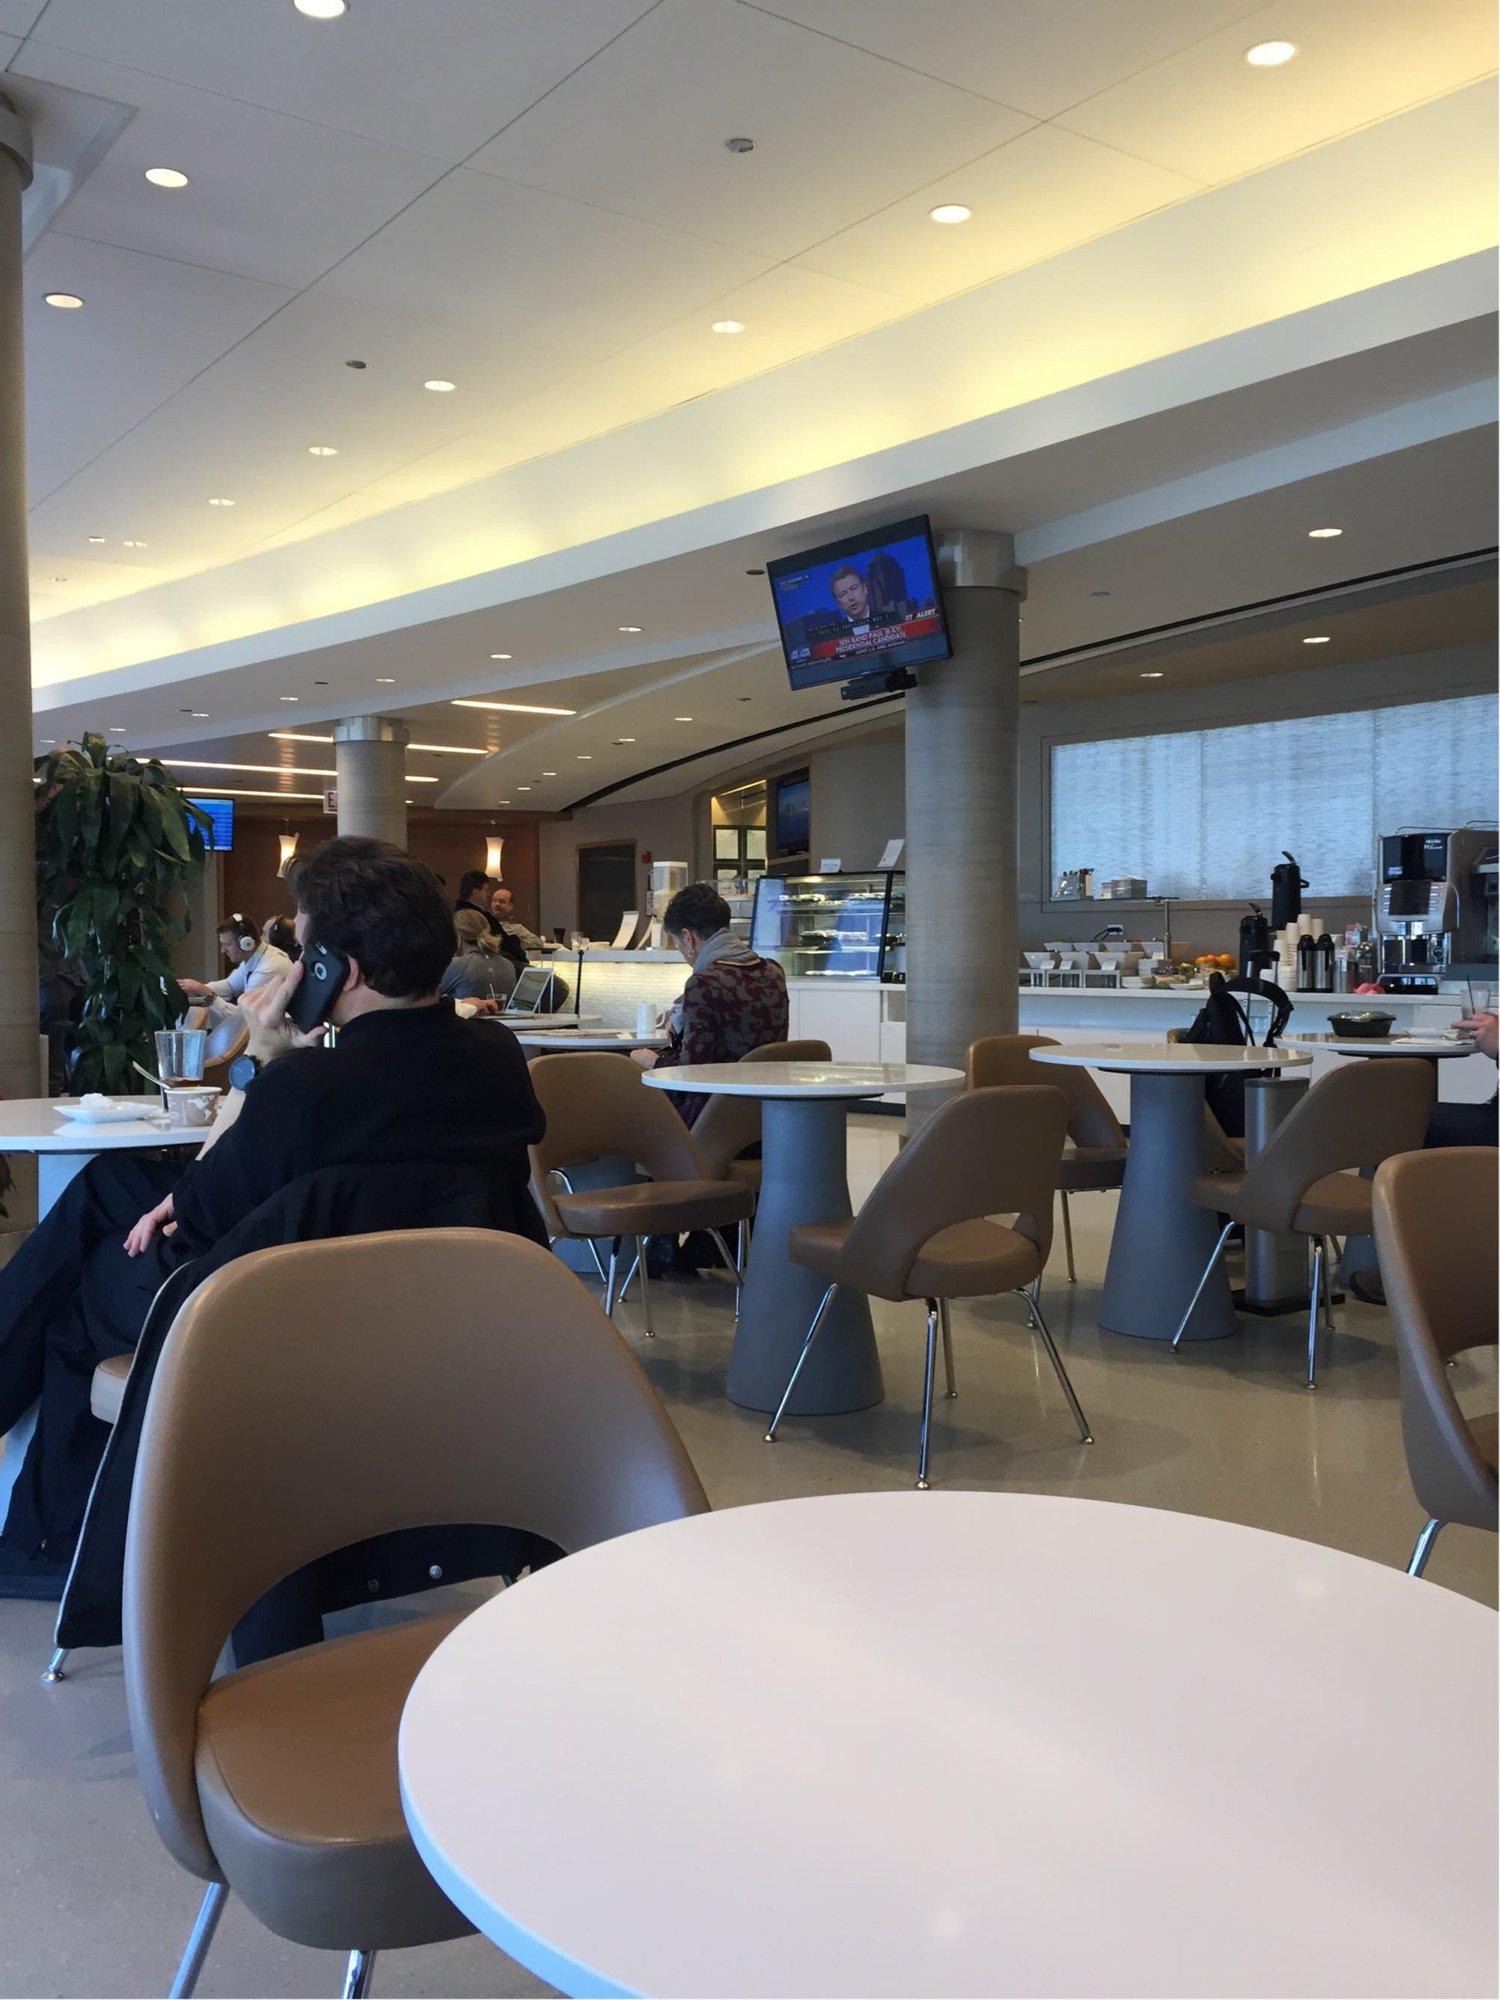 American Airlines Admirals Club image 41 of 50